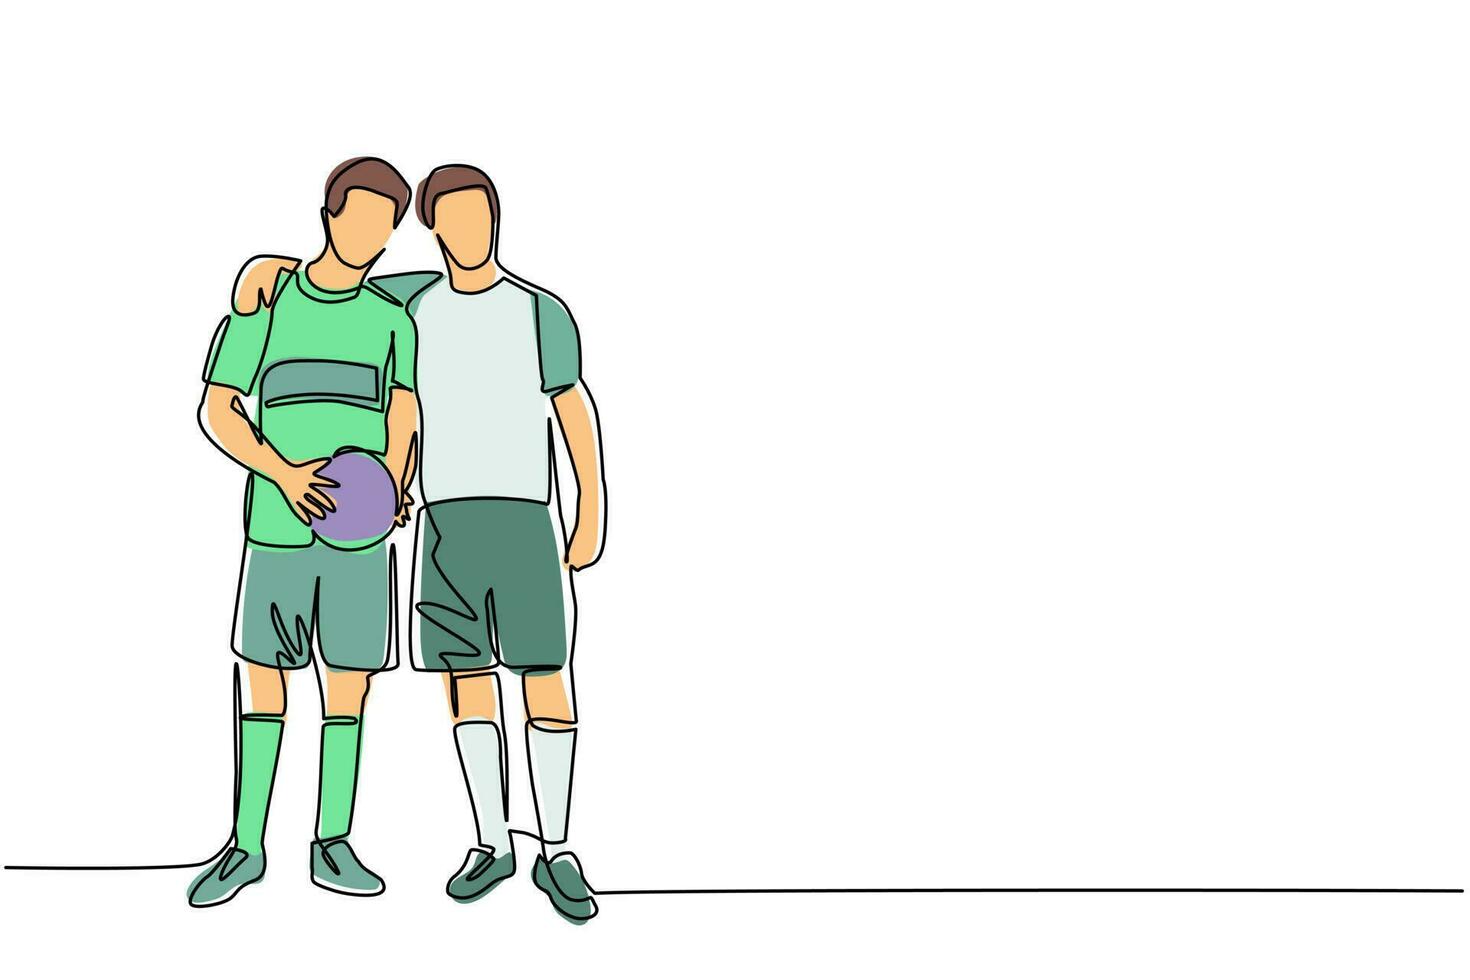 Continuous one line drawing two soccer players embrace each other. Two friendly walking together after match finished. Male soccer players celebrating goal with hug. Single line draw design vector